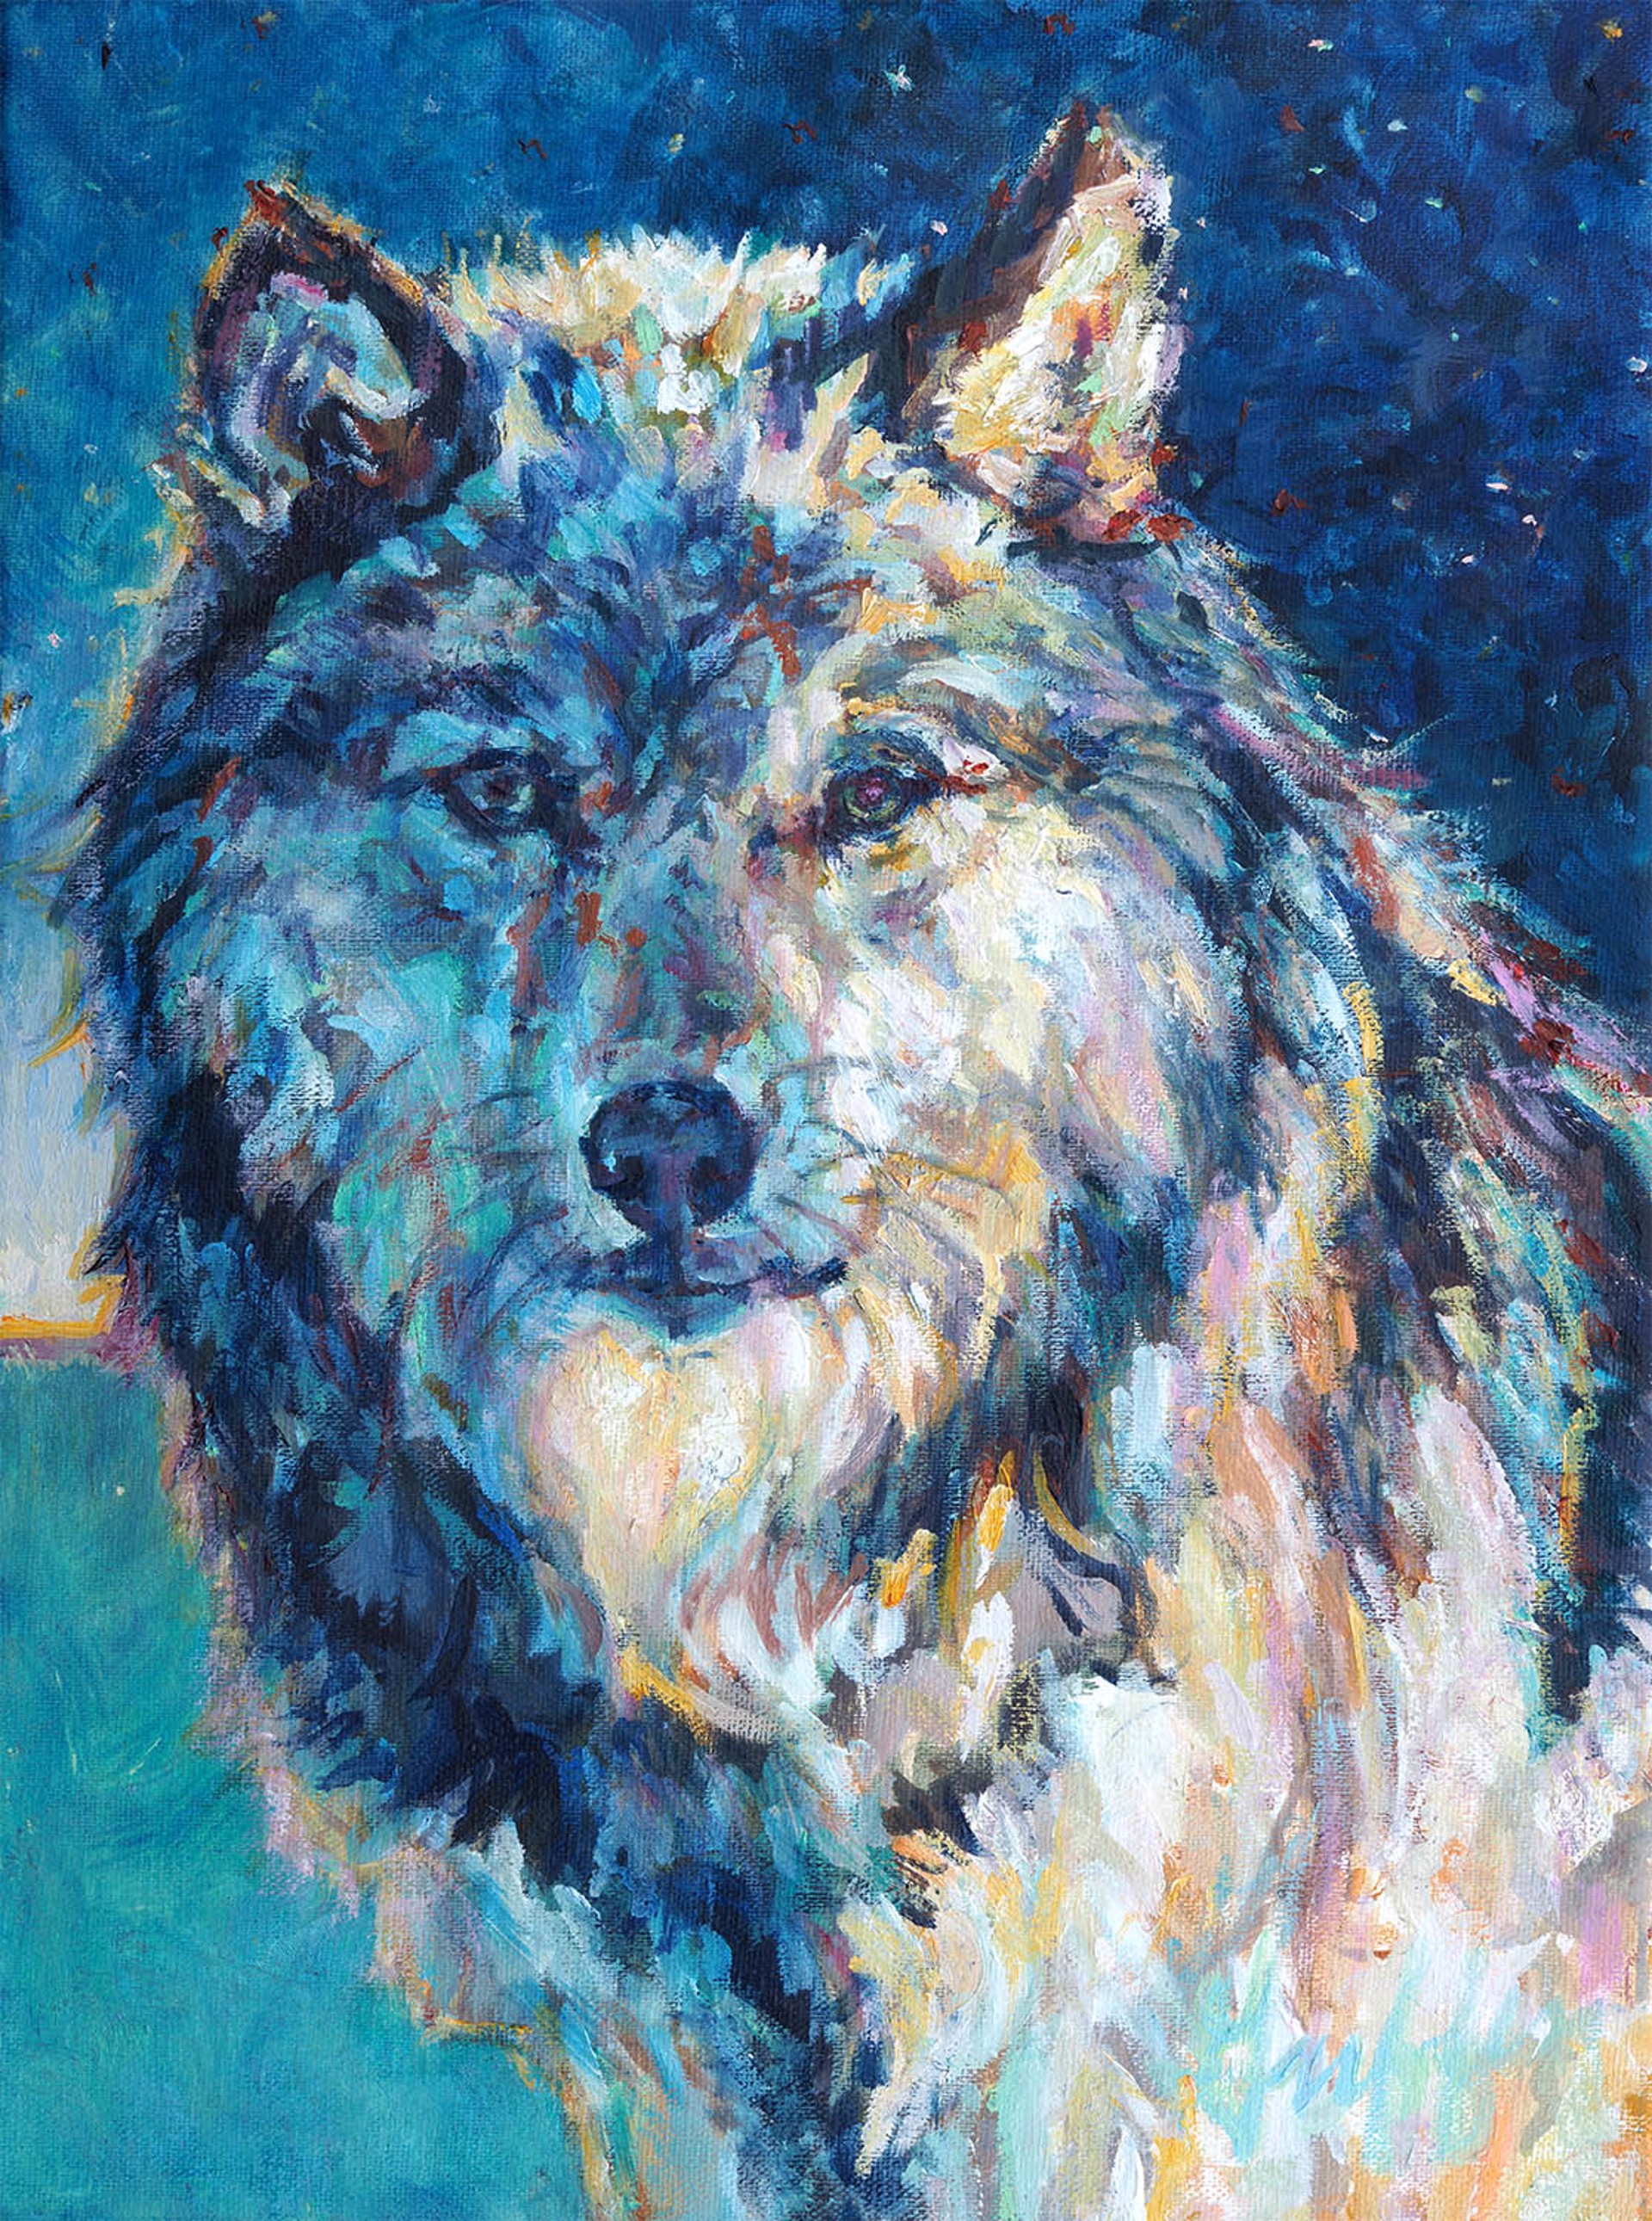 Oil Painting On Linen 9x12 Of Blue Wolf